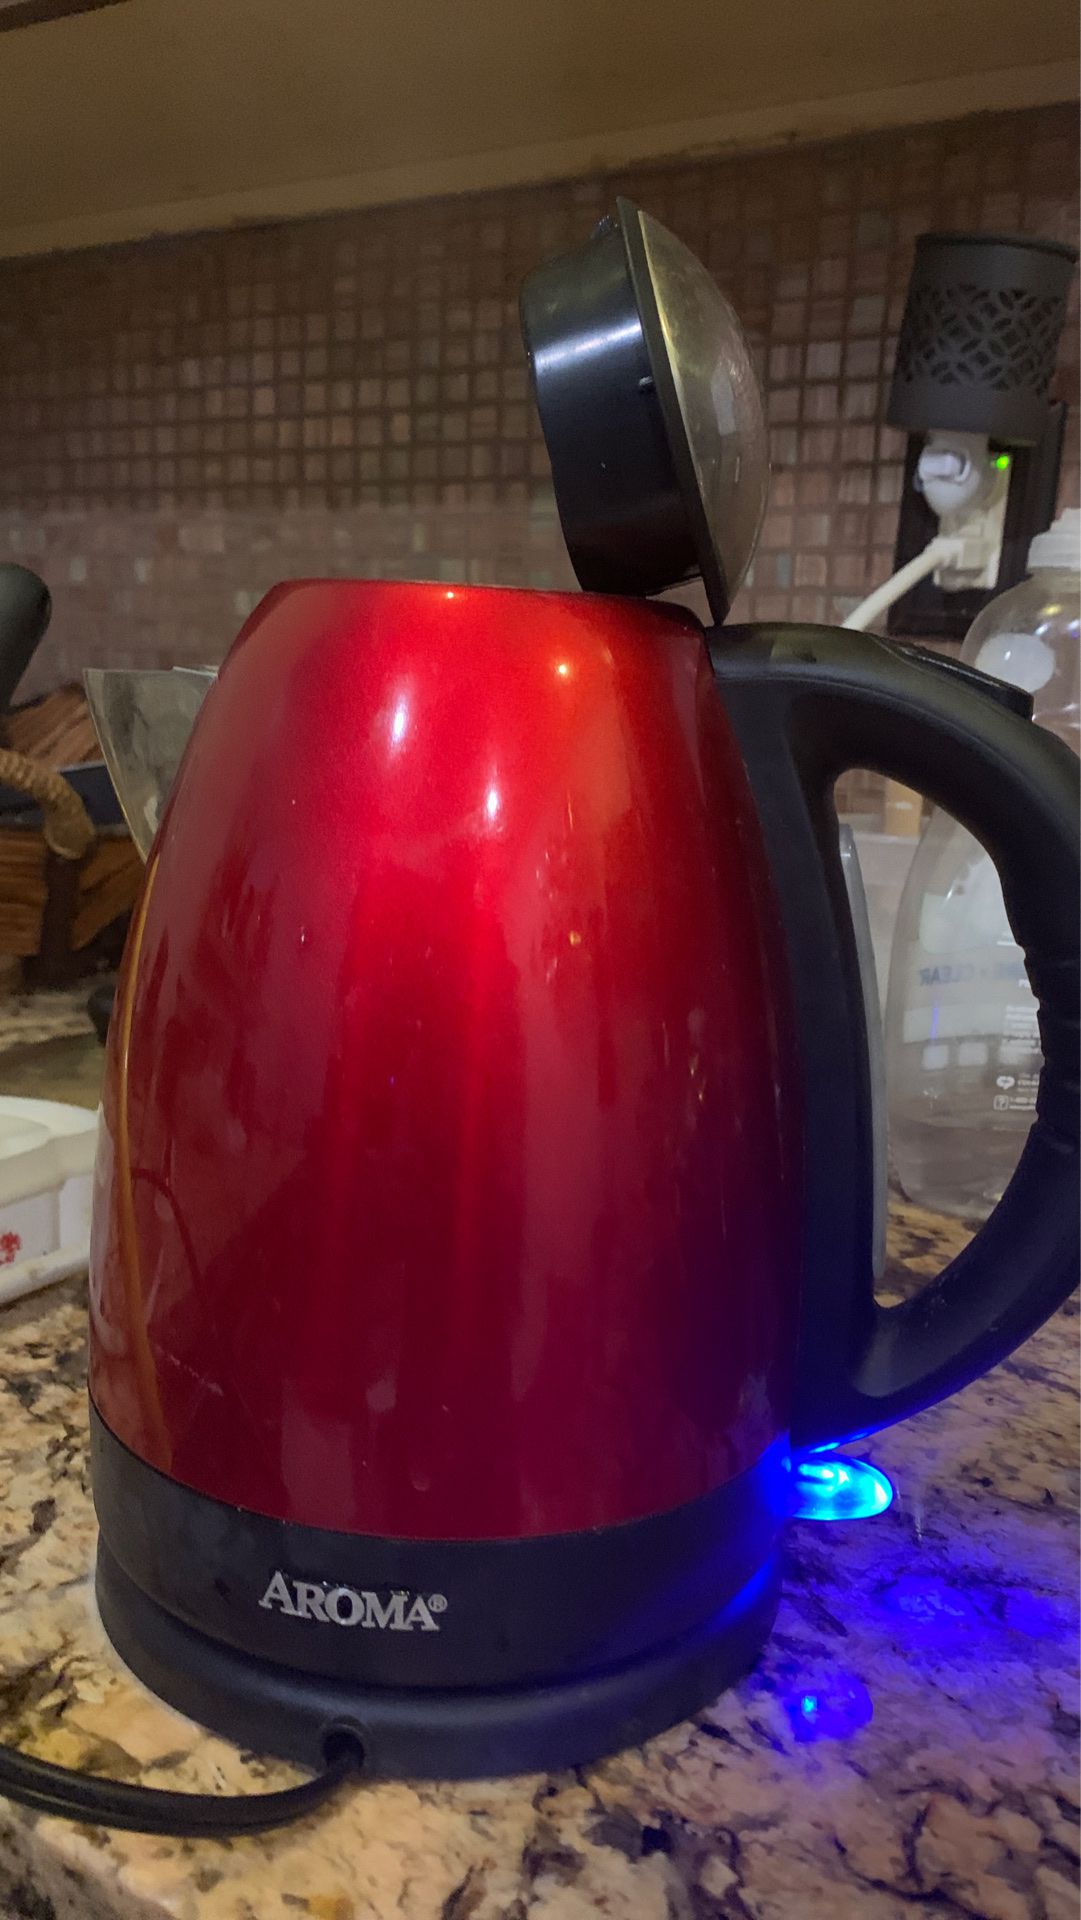 Aroma electric kettle